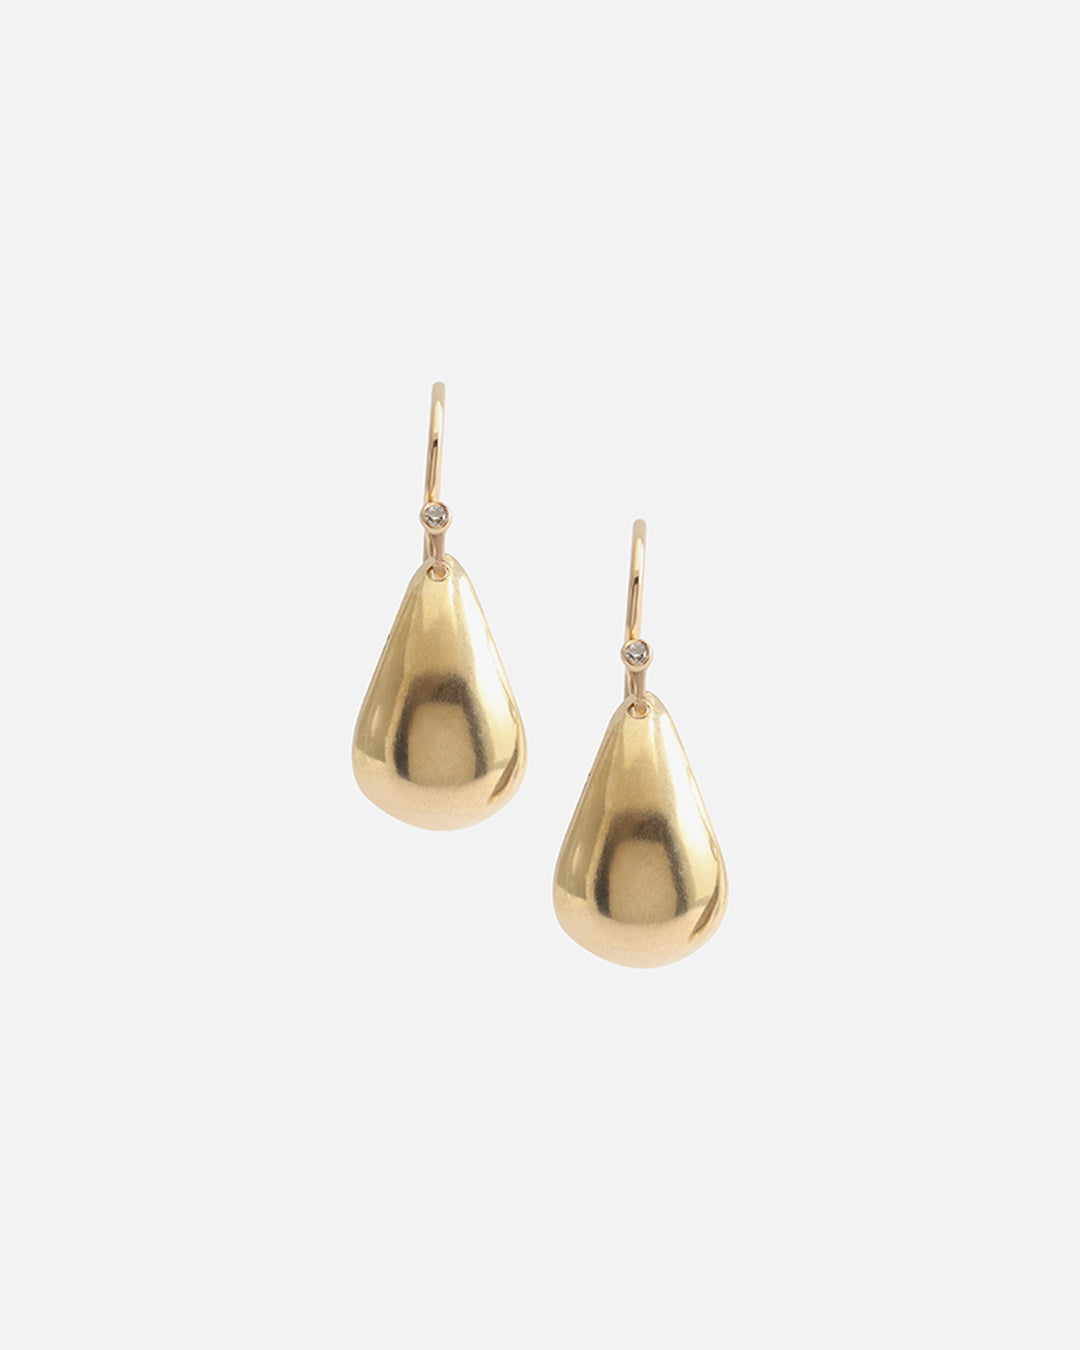 Concave / Earrings By Tricia Kirkland